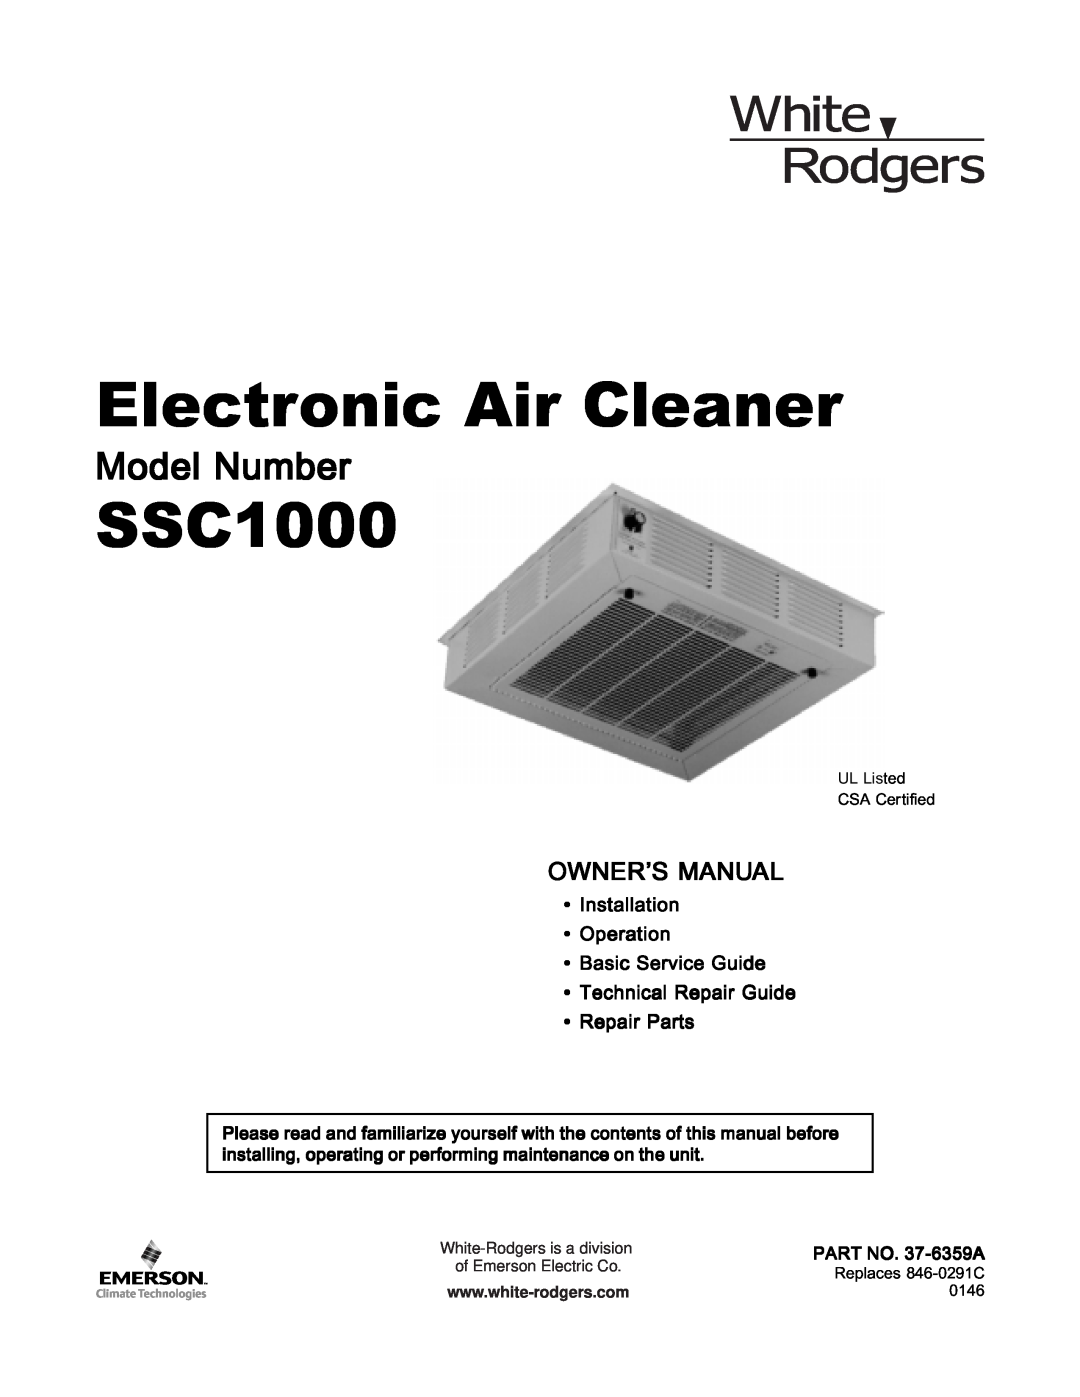 White Rodgers SSC1000 manual Installation Operation Basic Service Guide, Technical Repair Guide Repair Parts, Model Number 